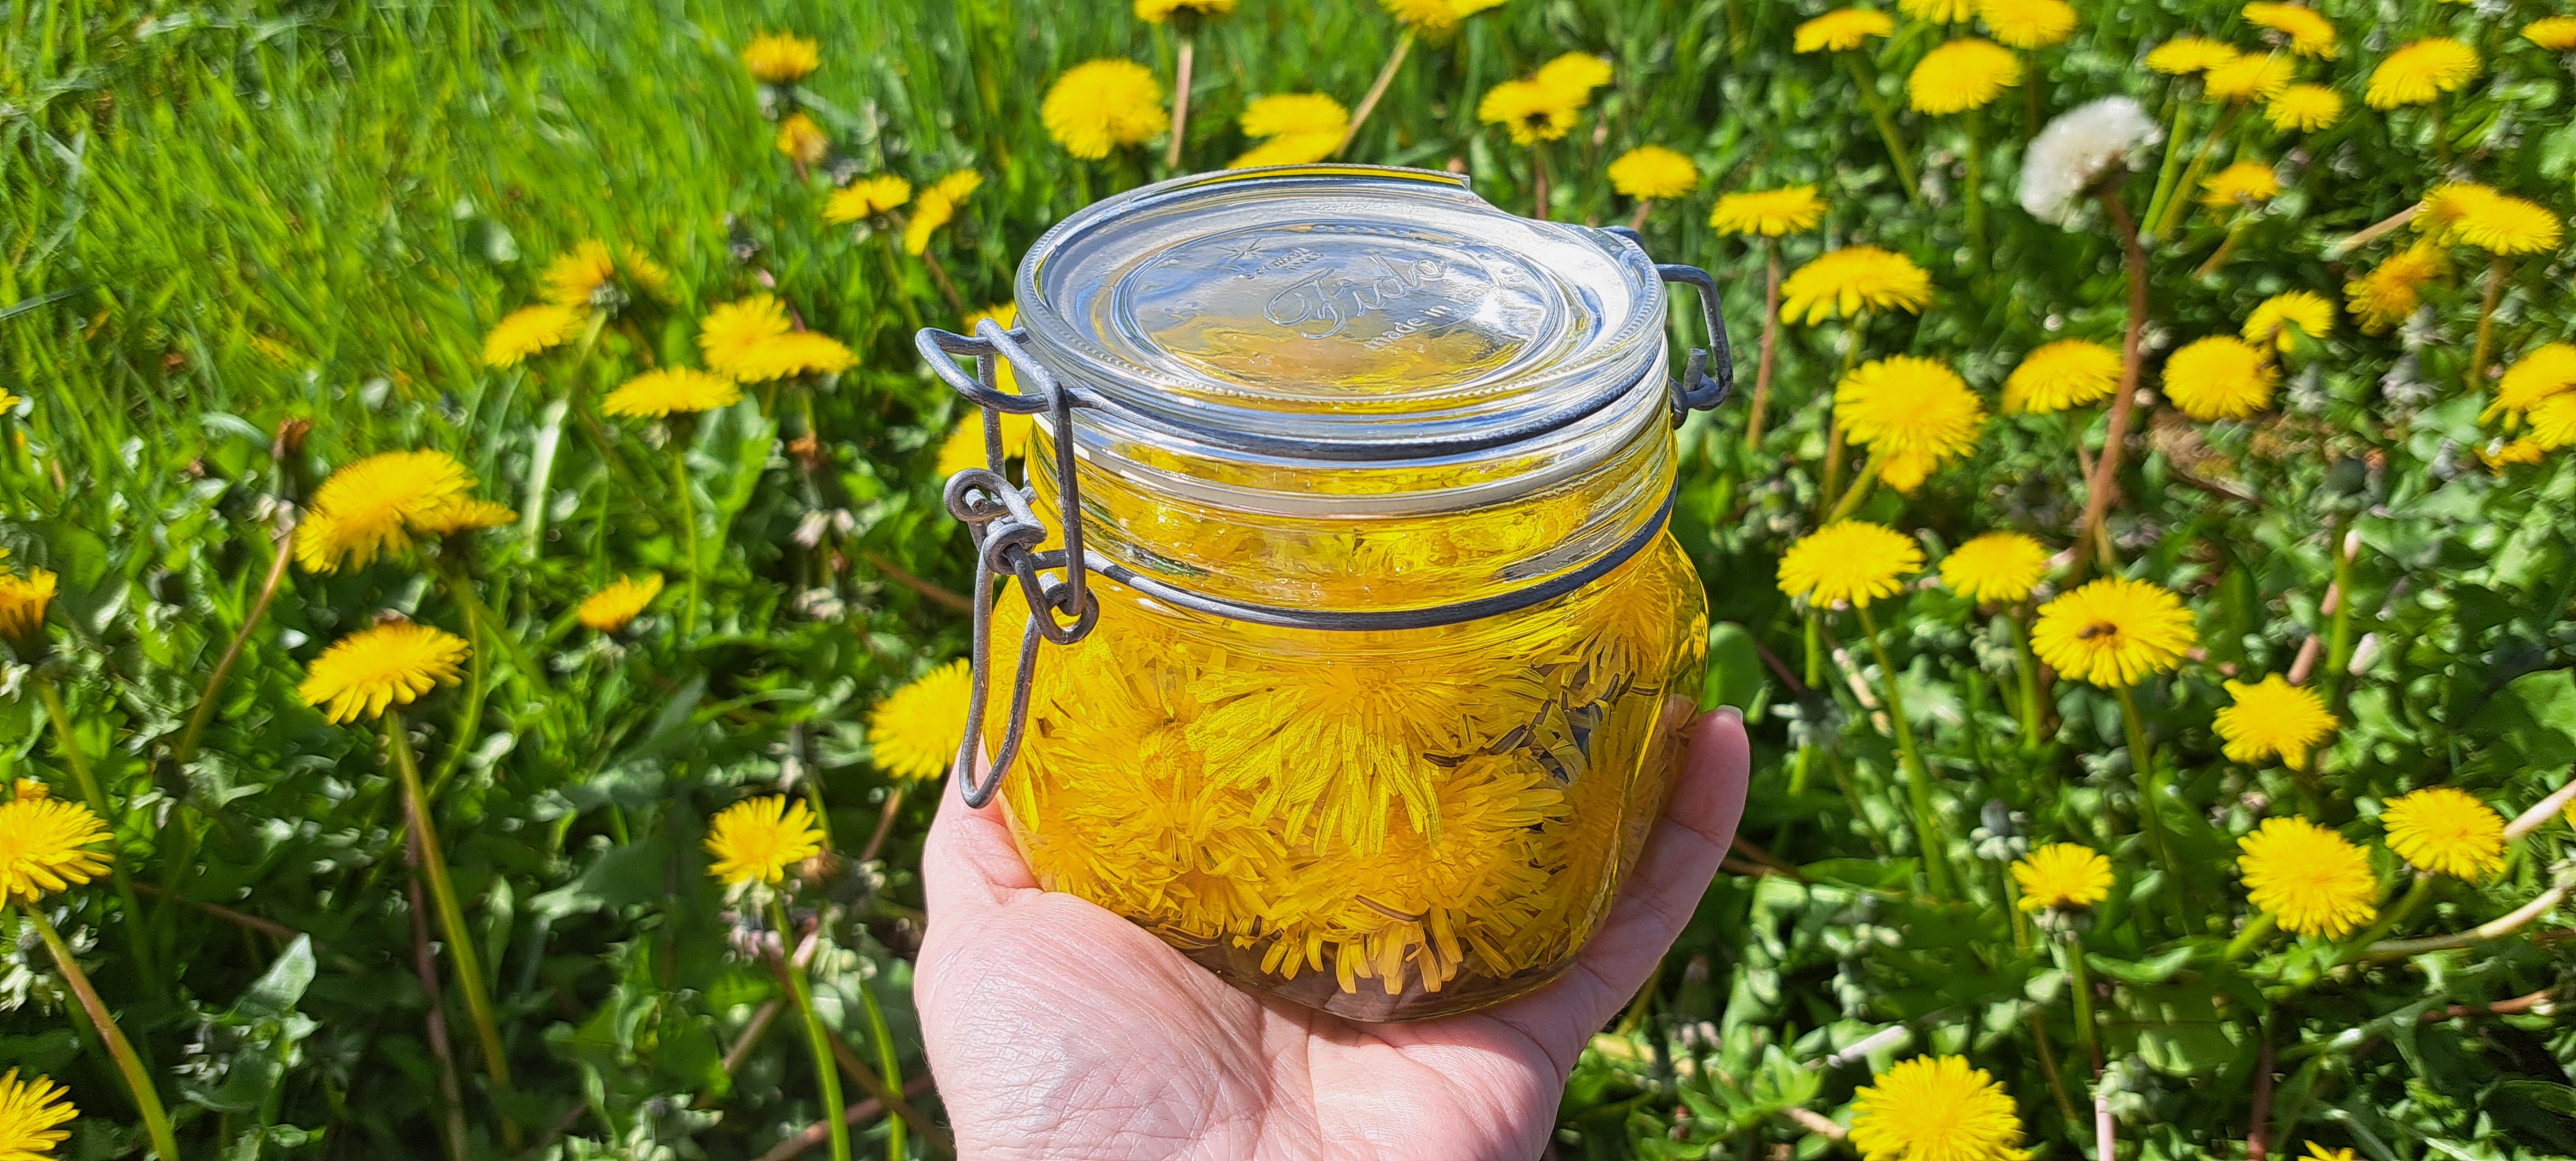 A glass jar containing yellow dandelion flowers and sunflower oil held in my hand over a patch of dandelions growing in my garden.